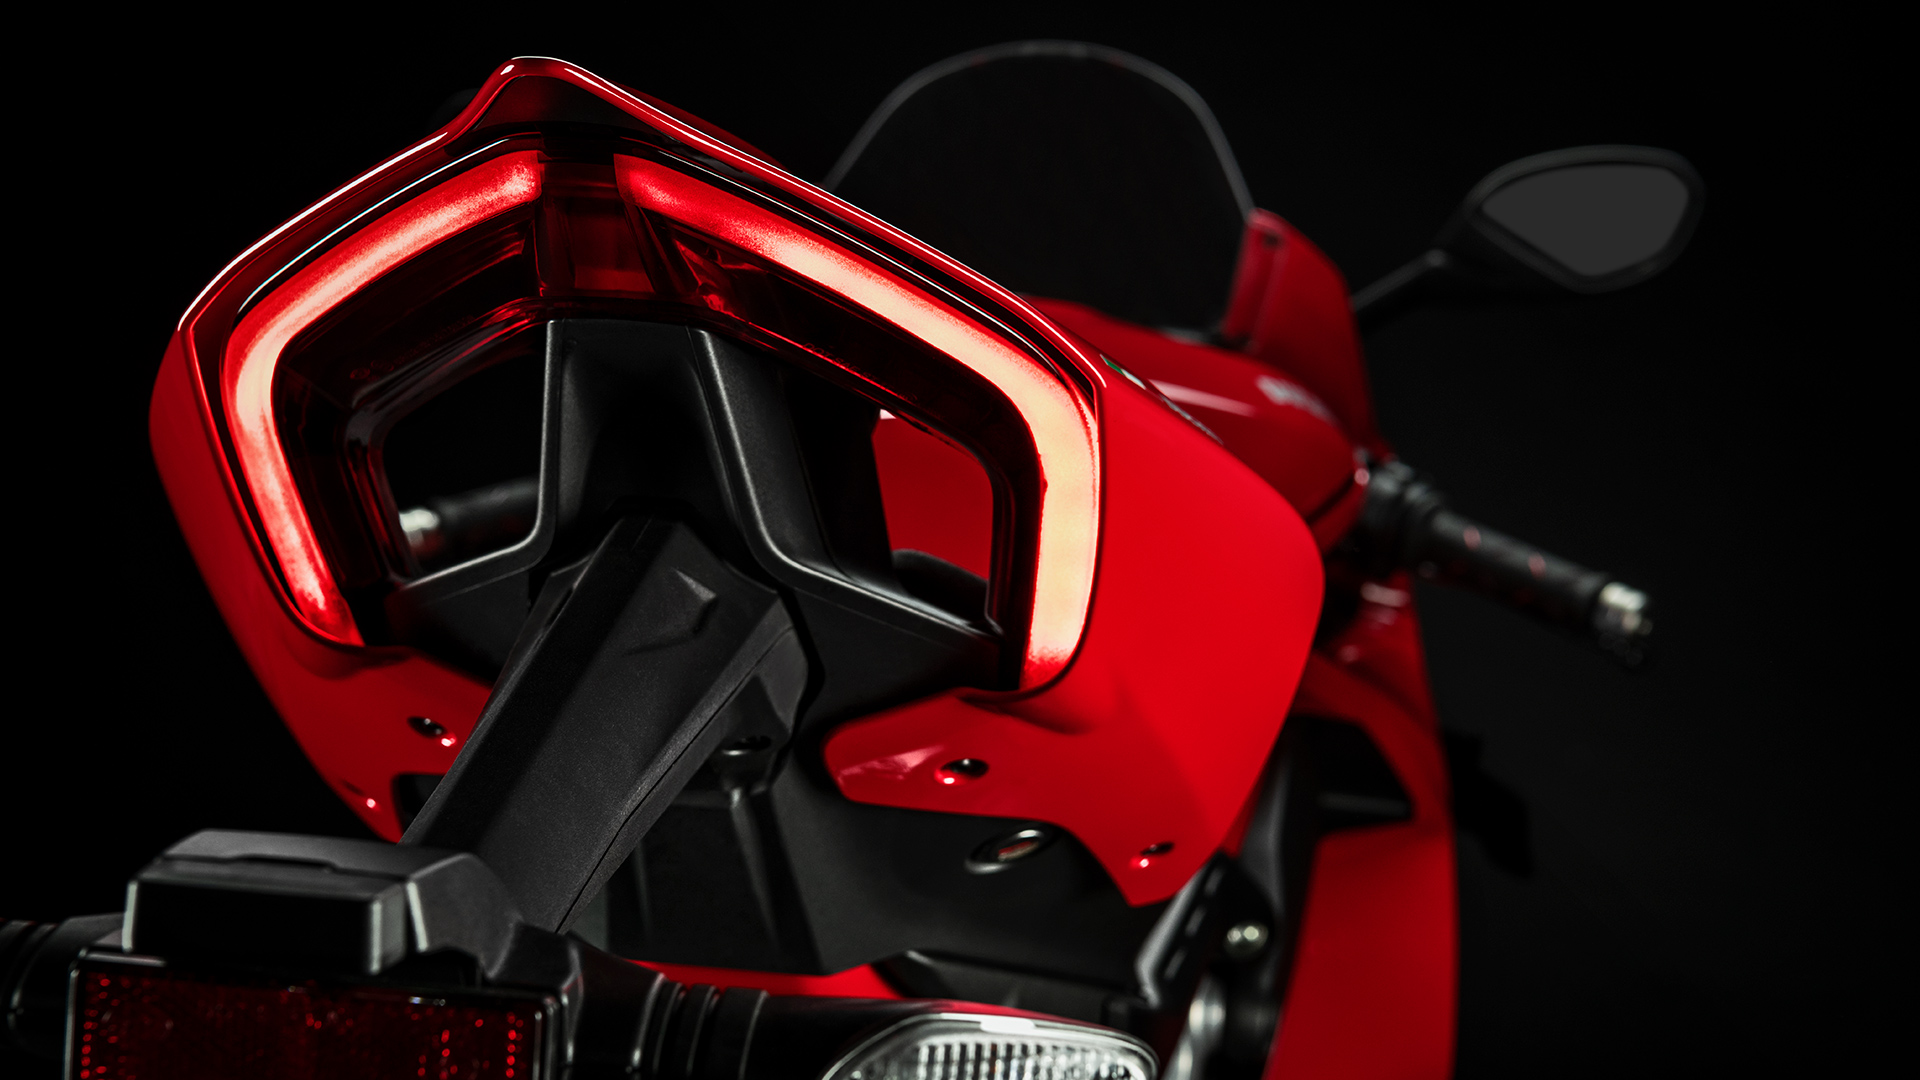 Panigale-V4-S-MY20-Red-06-Gallery-1920x1080